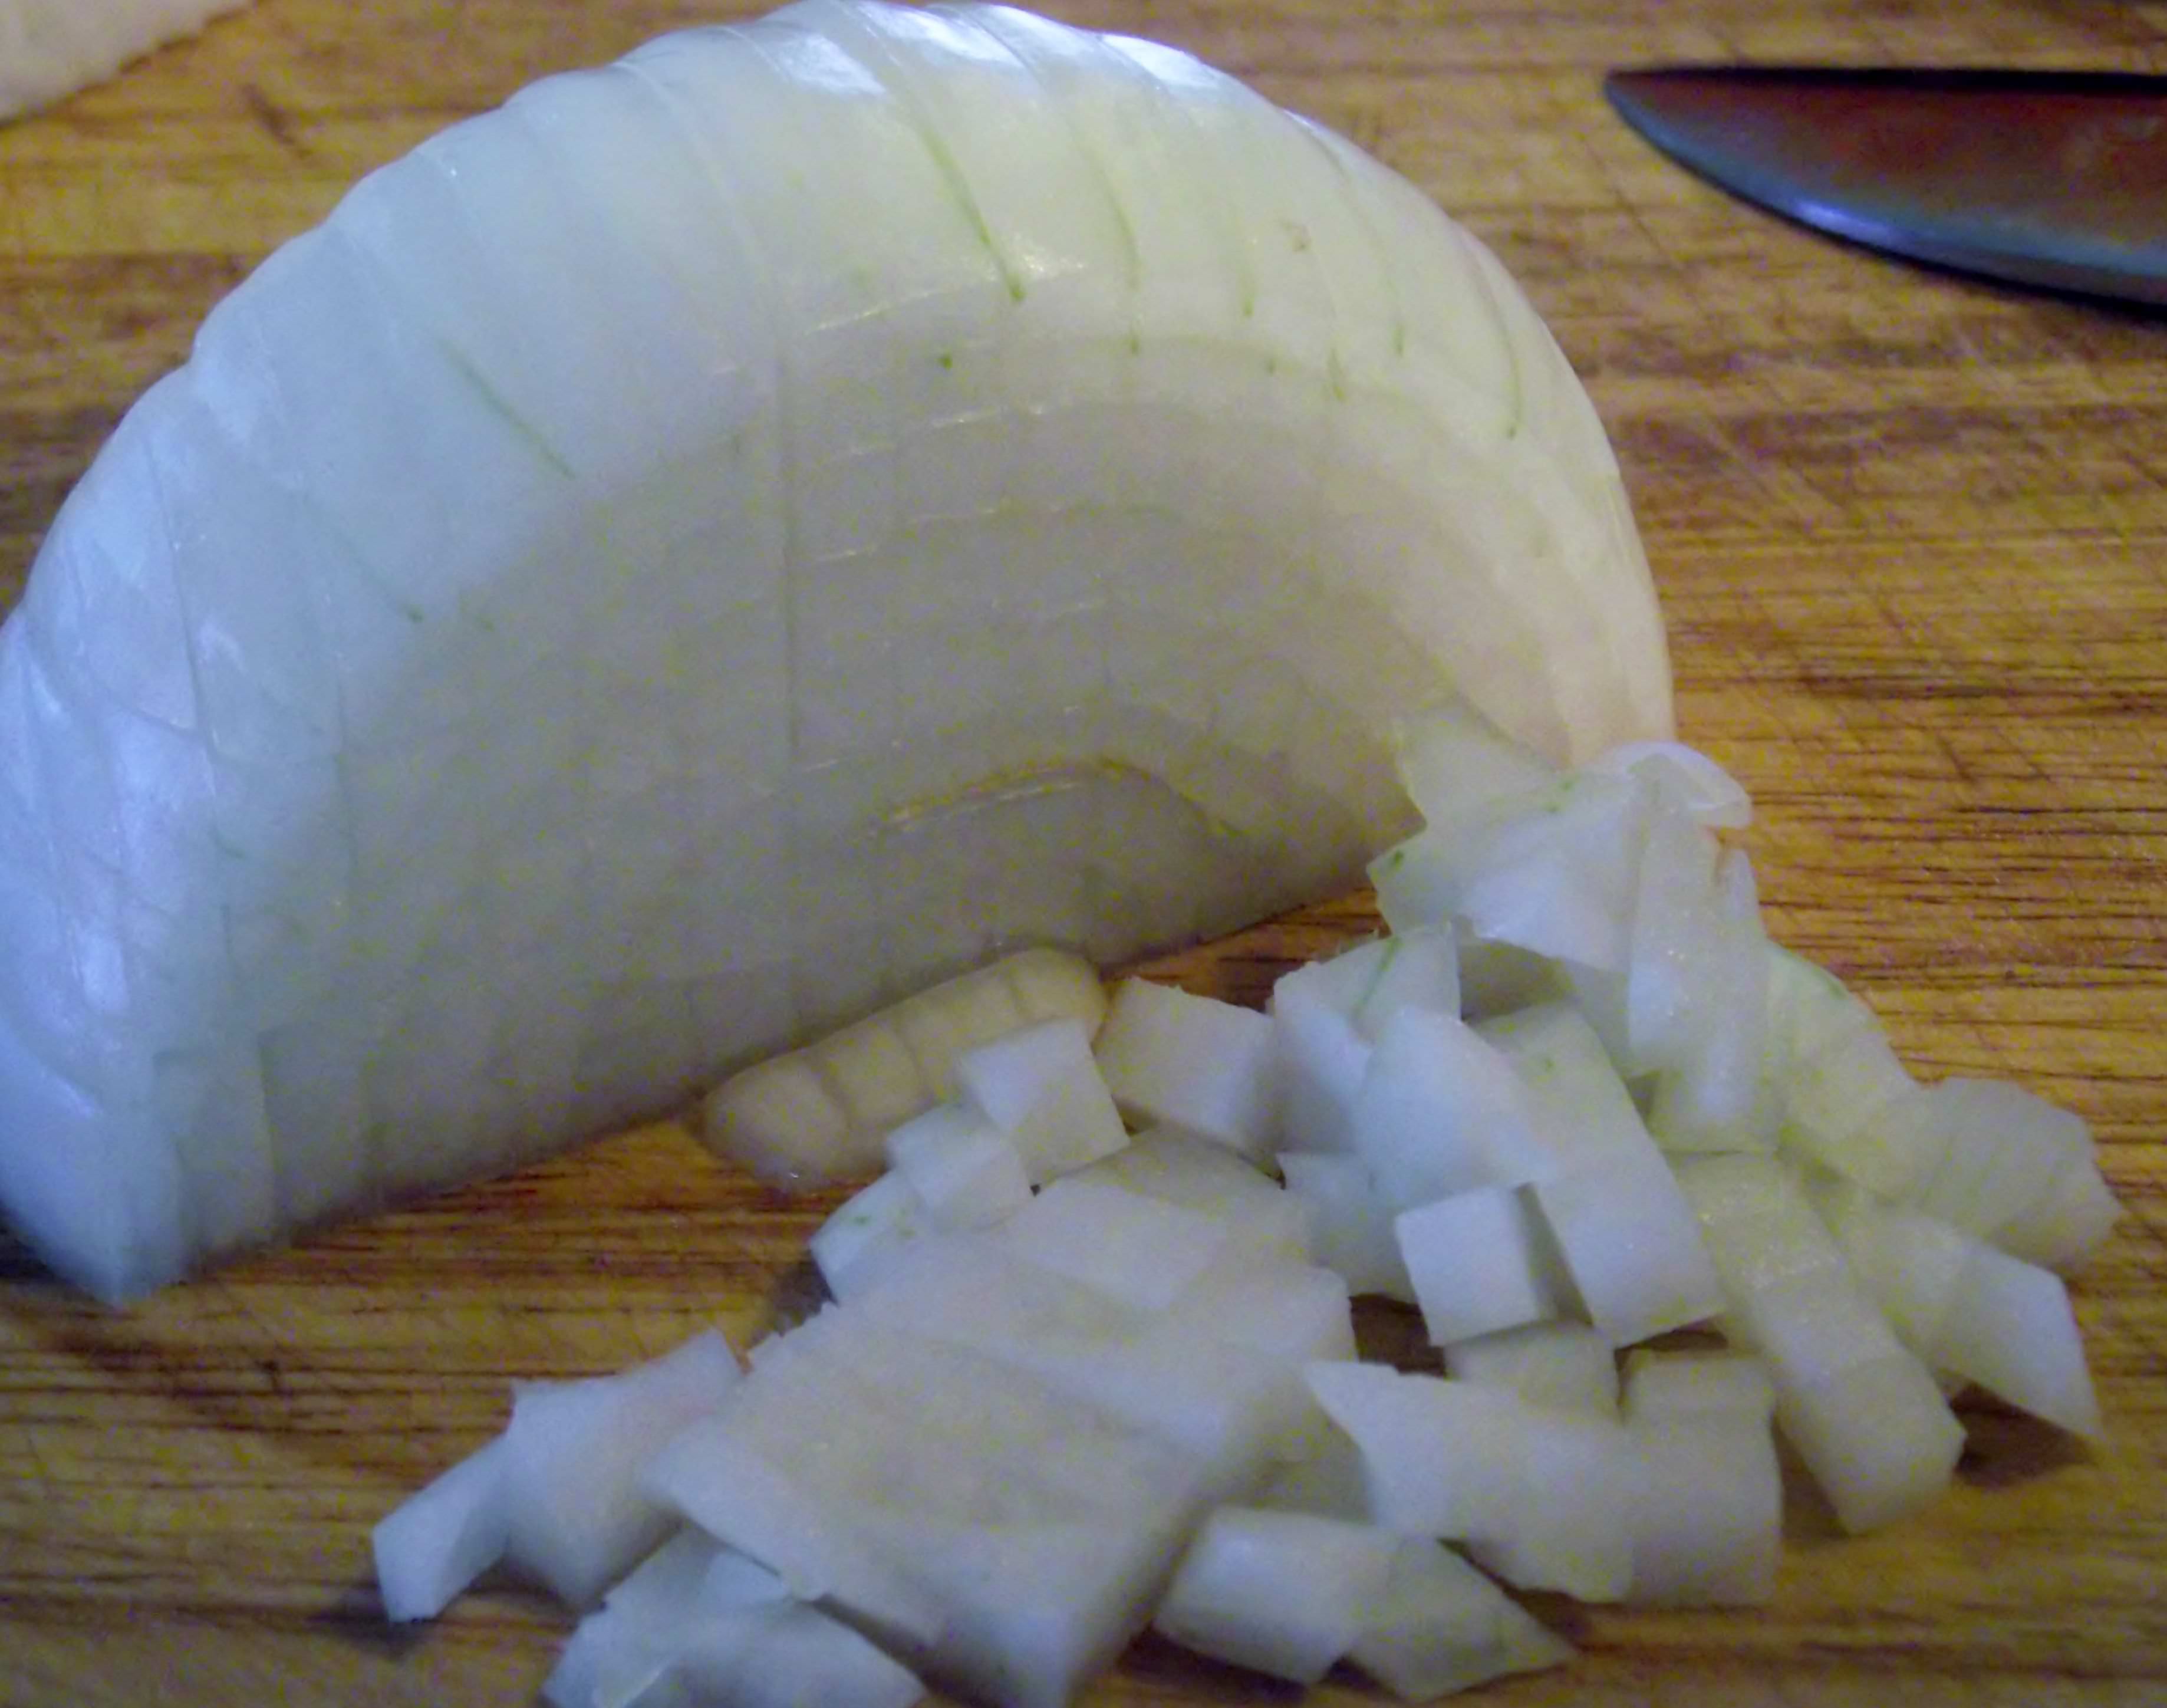 Slice the onion parallel to its equator.